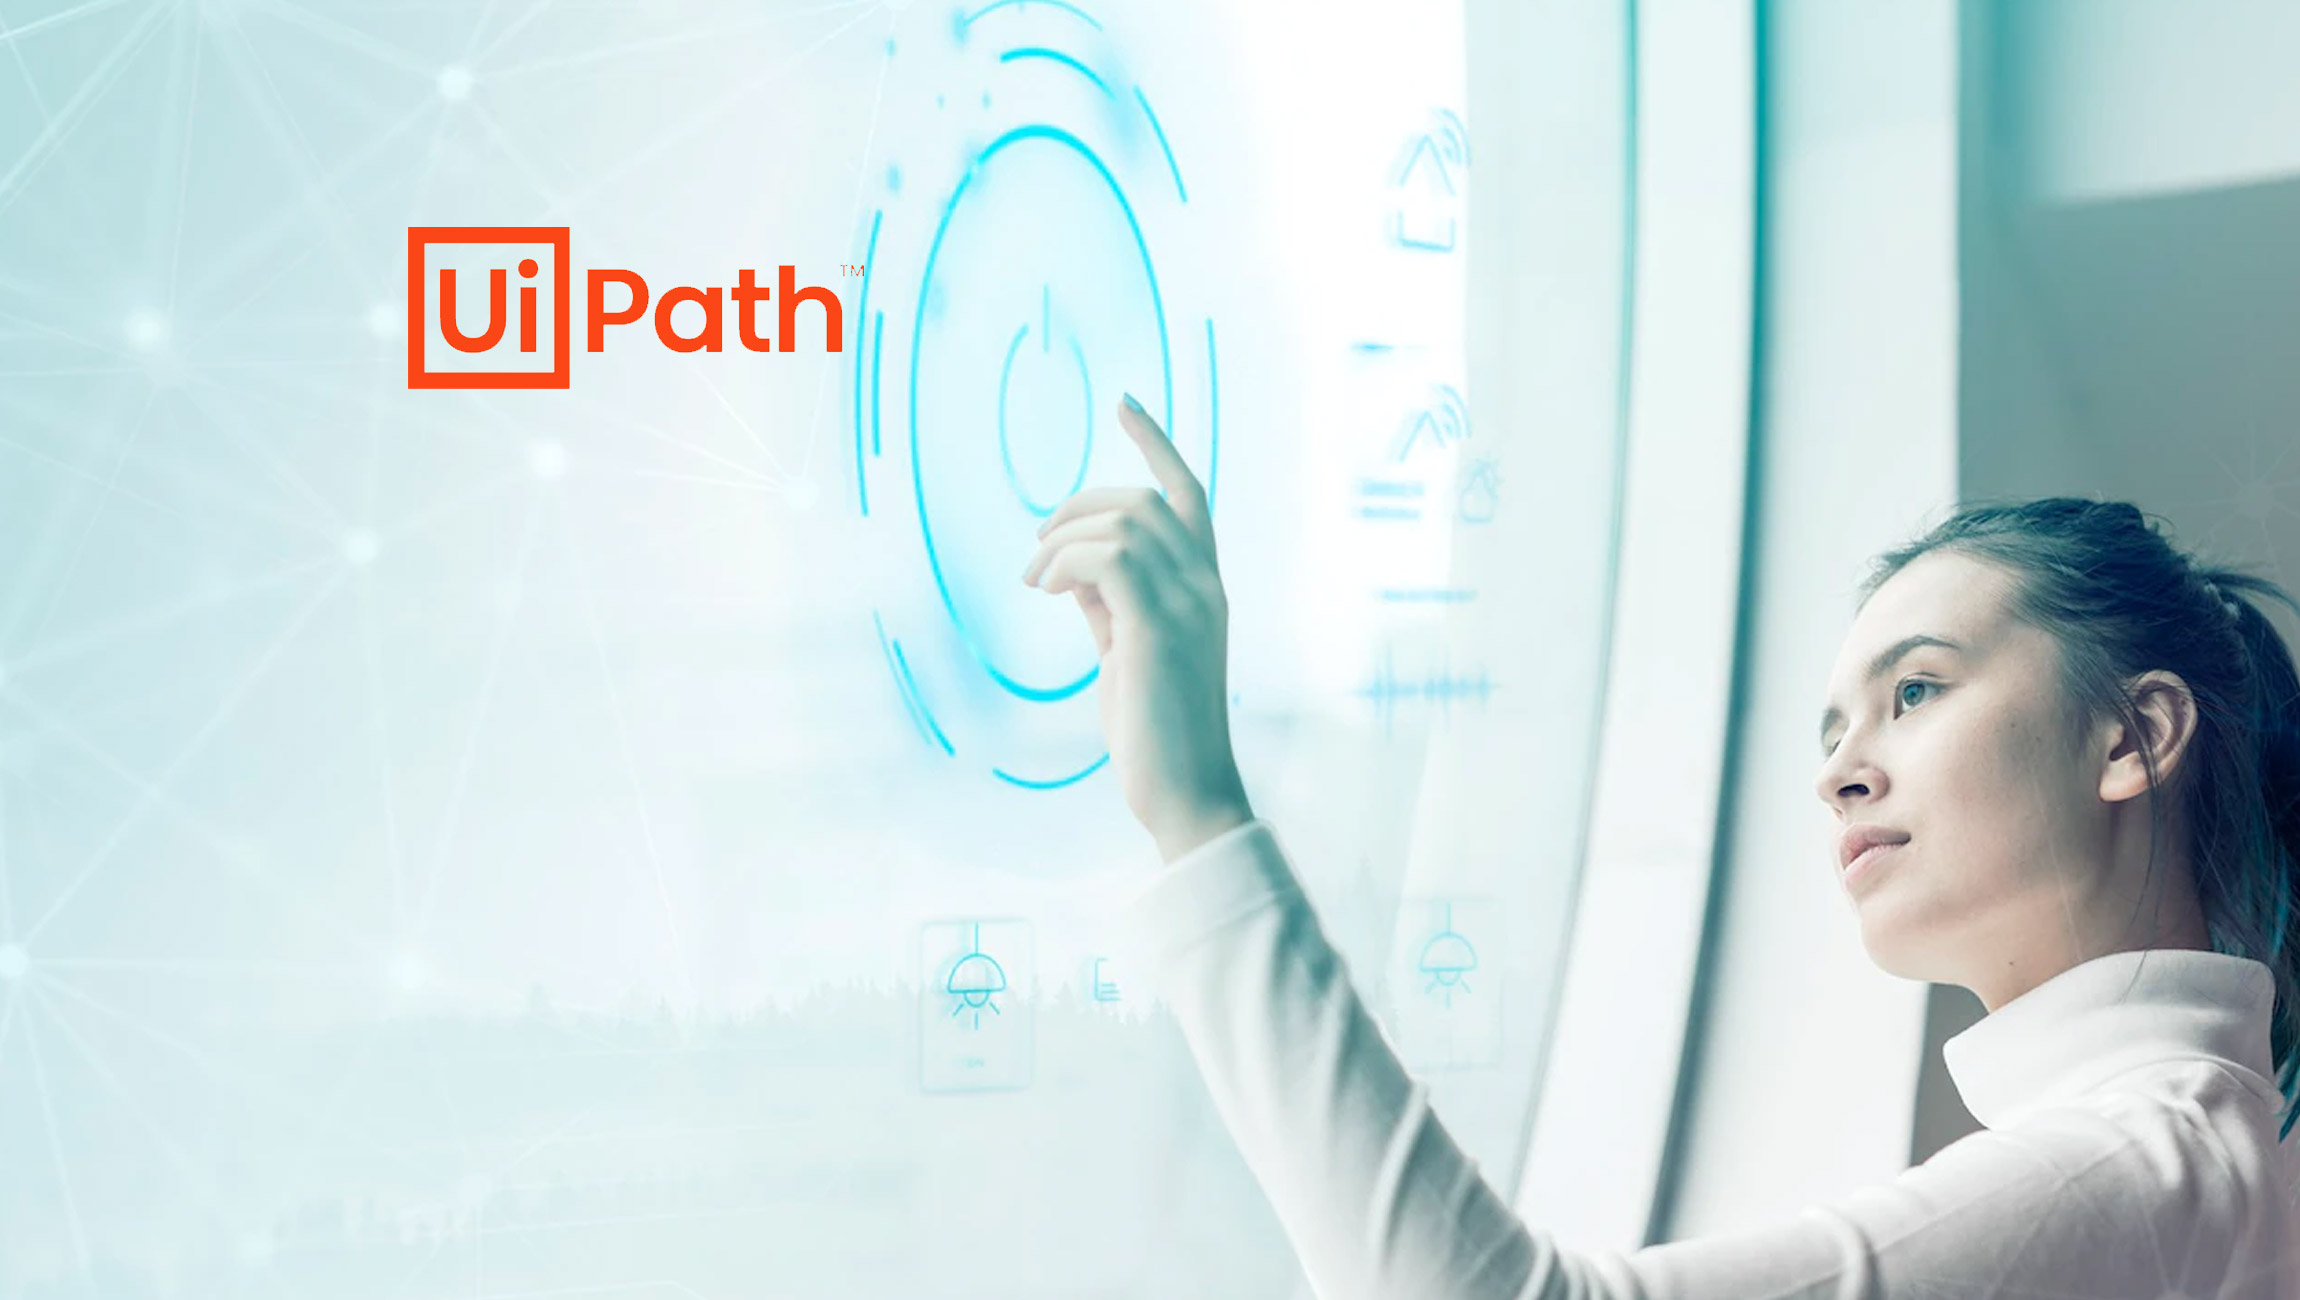 UiPath Amplifies Value of New Machine Learning Models by Integrating Amazon SageMaker with Automation Workflows